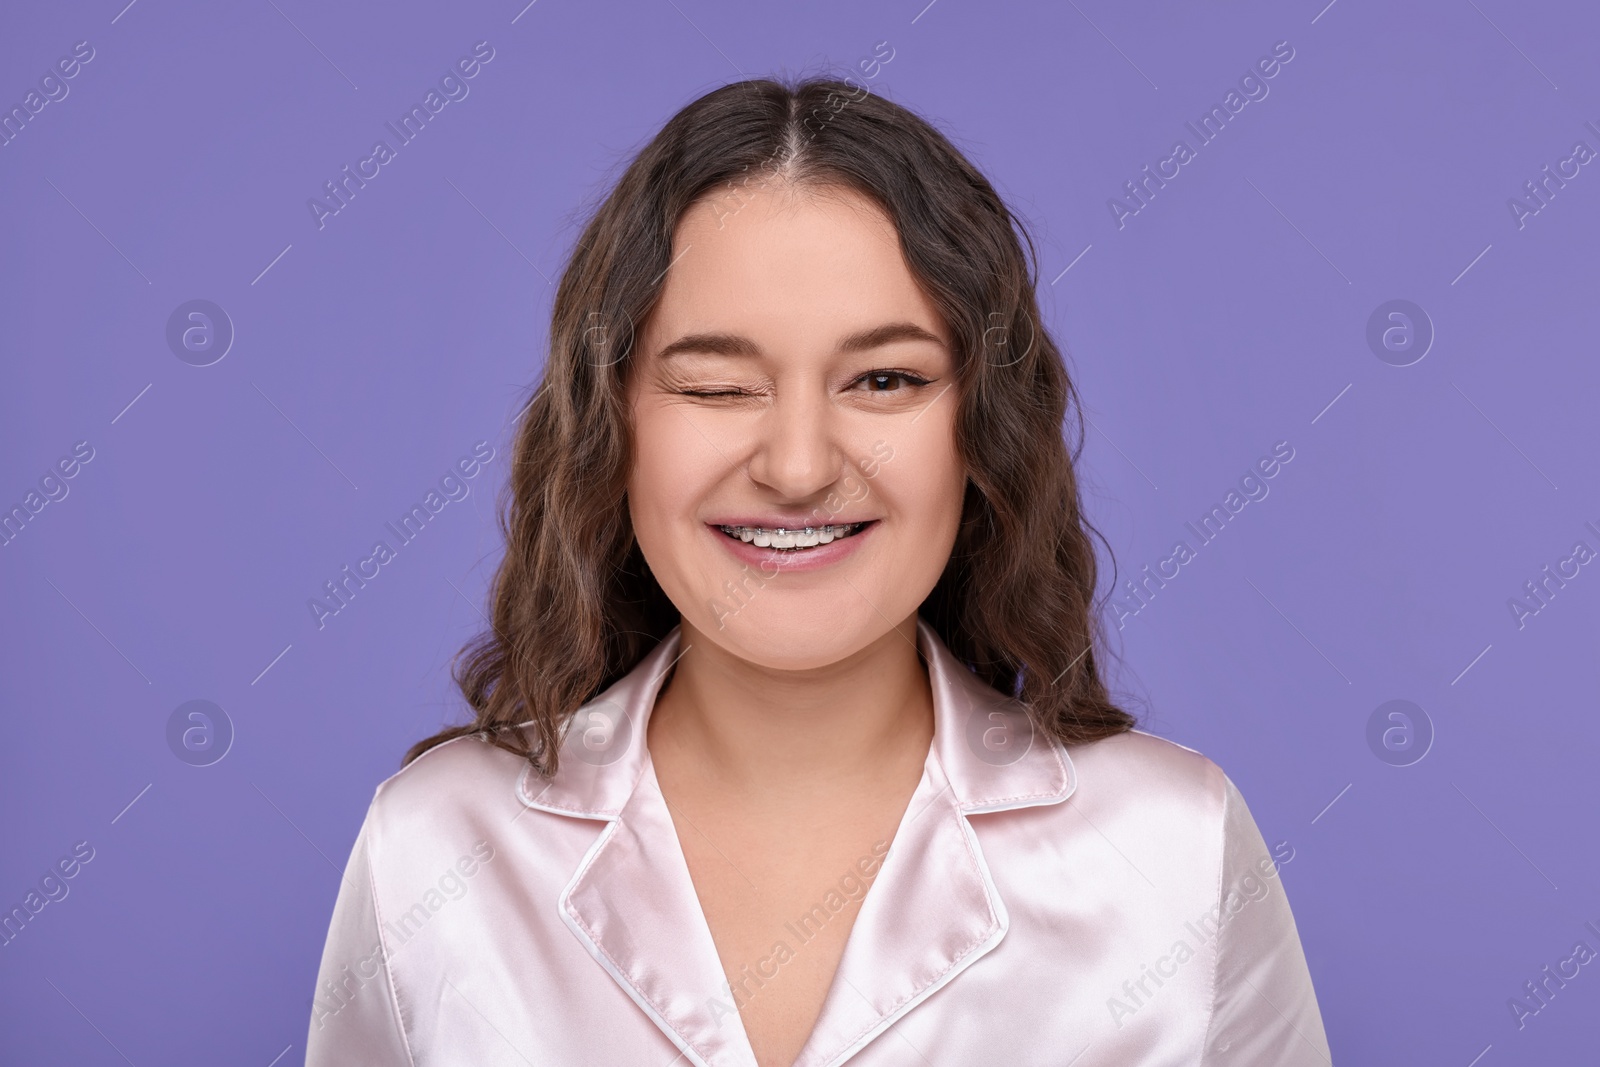 Photo of Smiling woman with braces winking on violet background